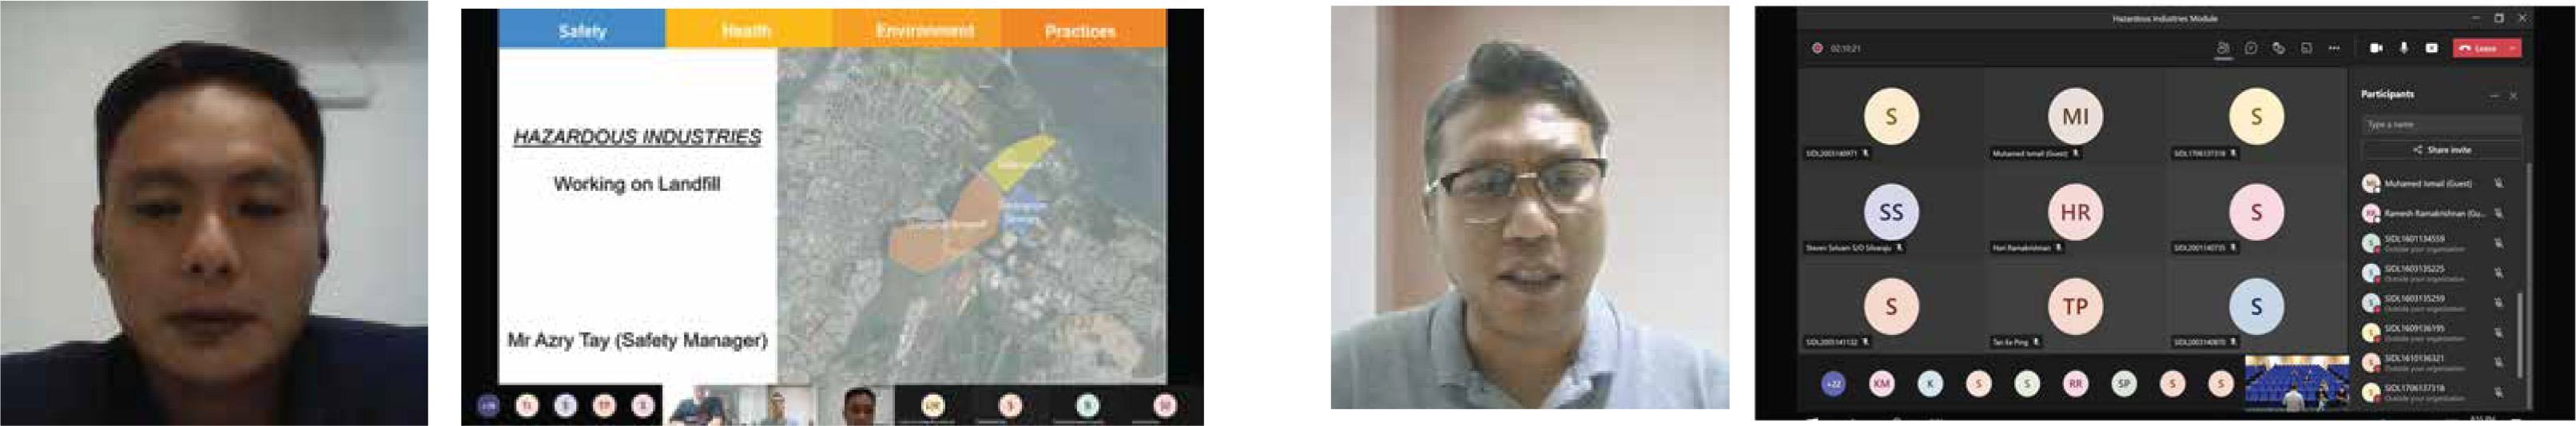 Left: Lecture by Mr Azry Tay (EHS Manager) on “Working on Landfill”, Right: Lecture by Mr Shamsir Bin Ali, EHS Trainer (Corporate) on “Challenges in the Rock Blasting Industry”